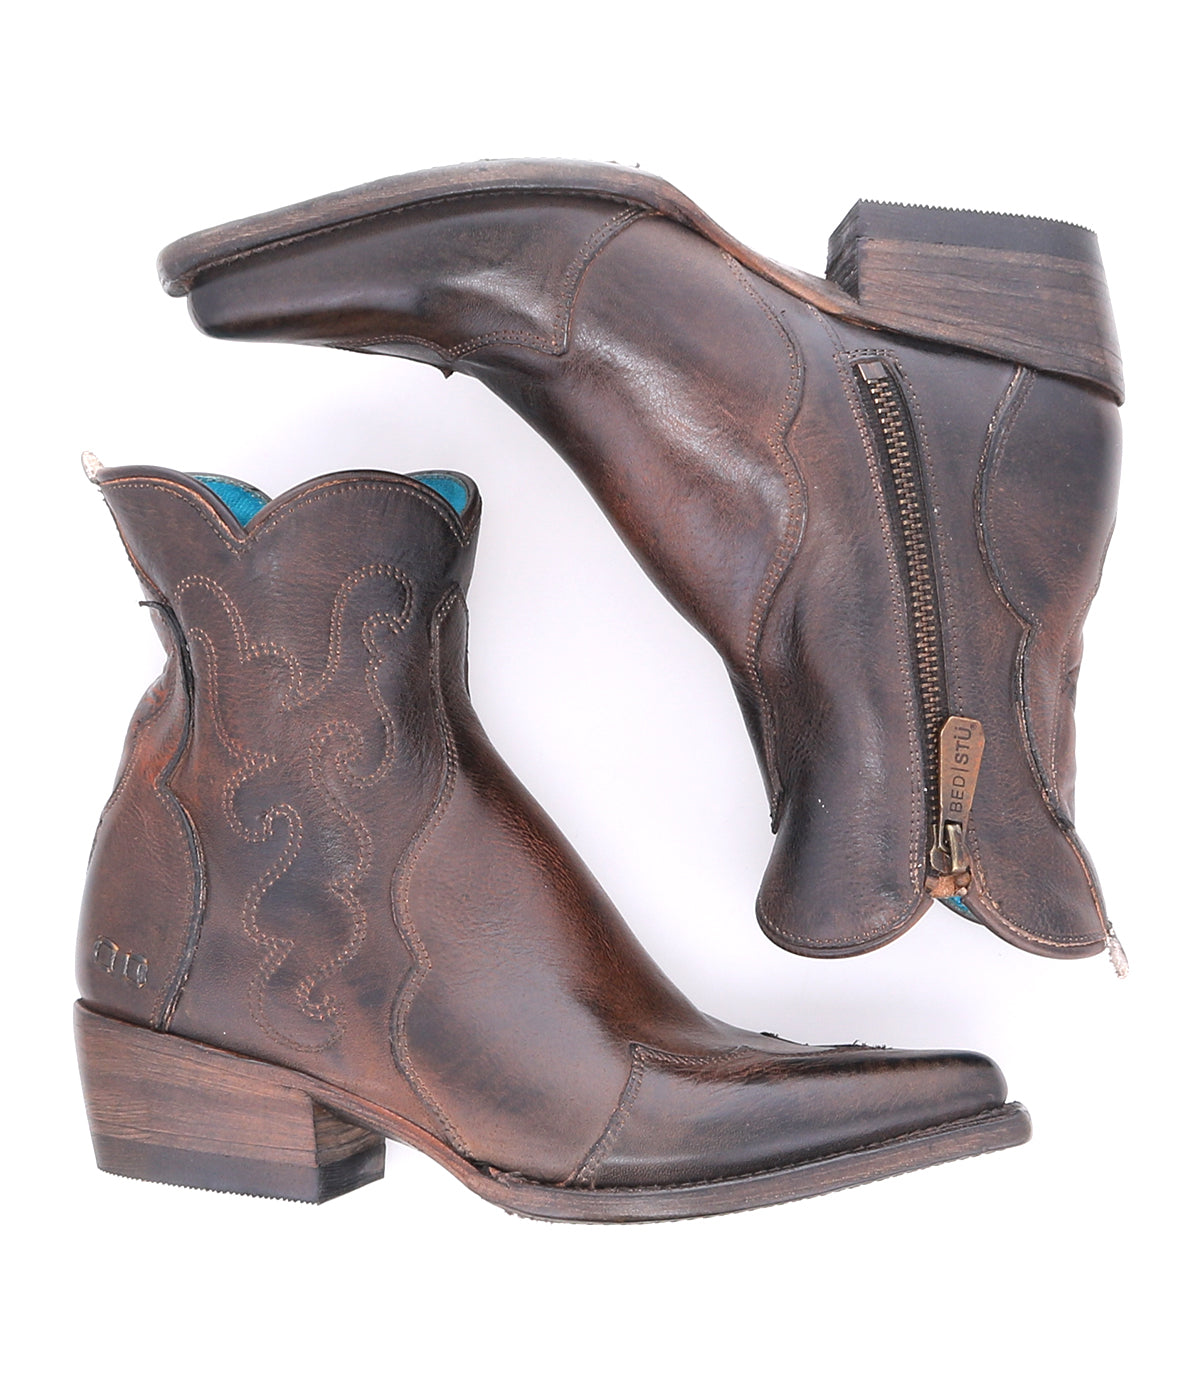 A pair of comfortable Ace leather cowboy boots in western style from Bed Stu.